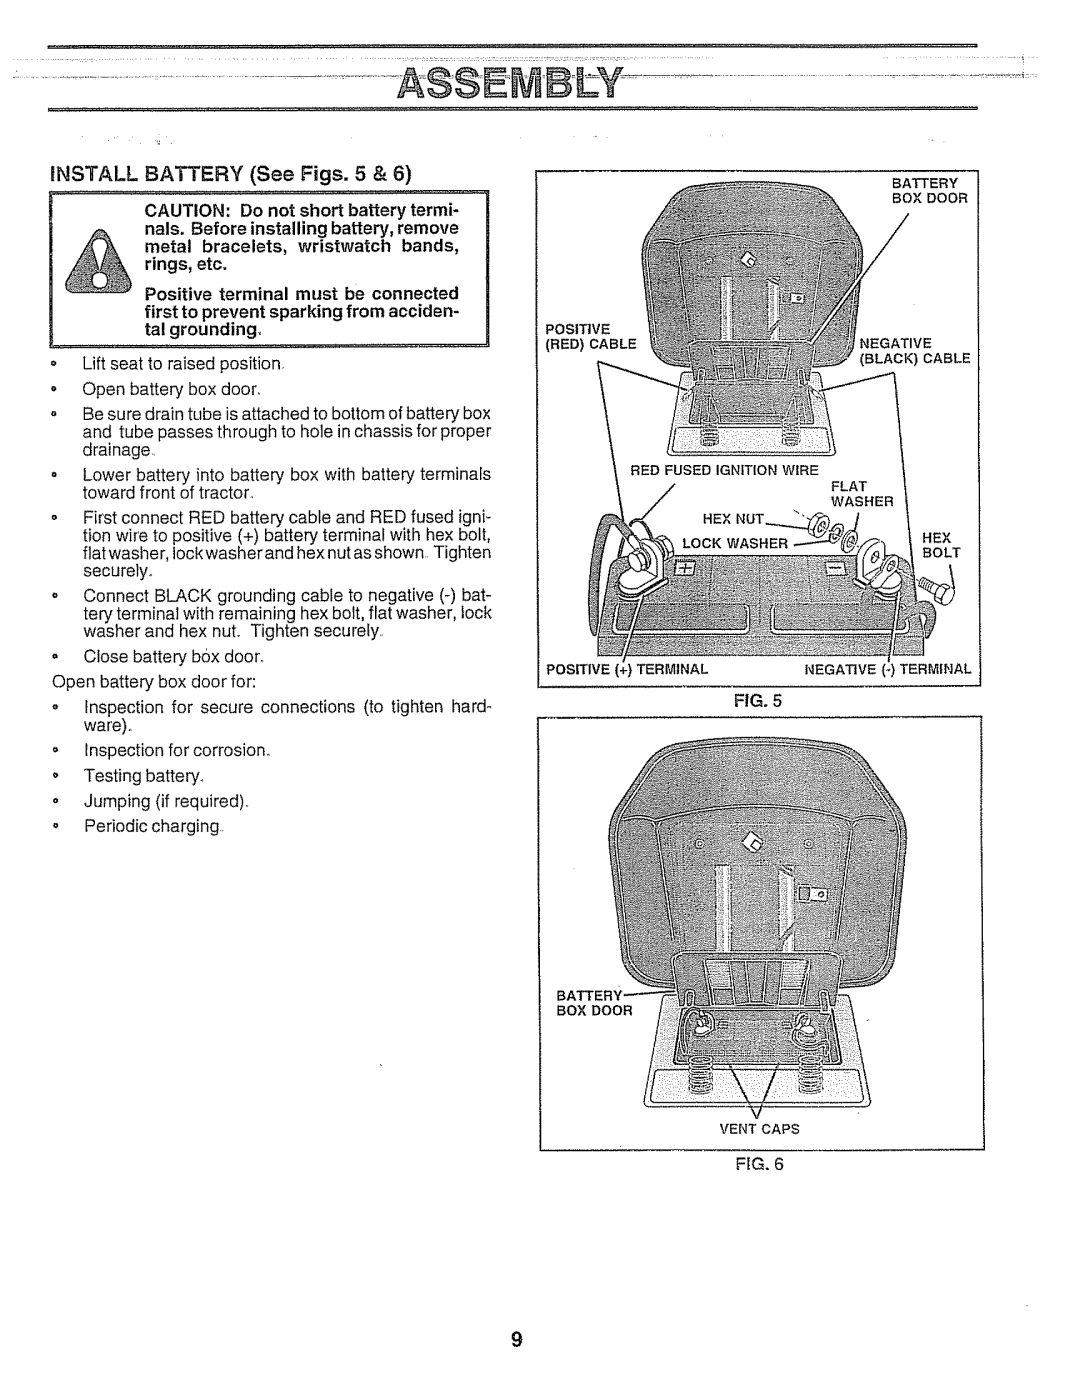 Craftsman 917.25693 owner manual INSTALL BATTERY See Figs 